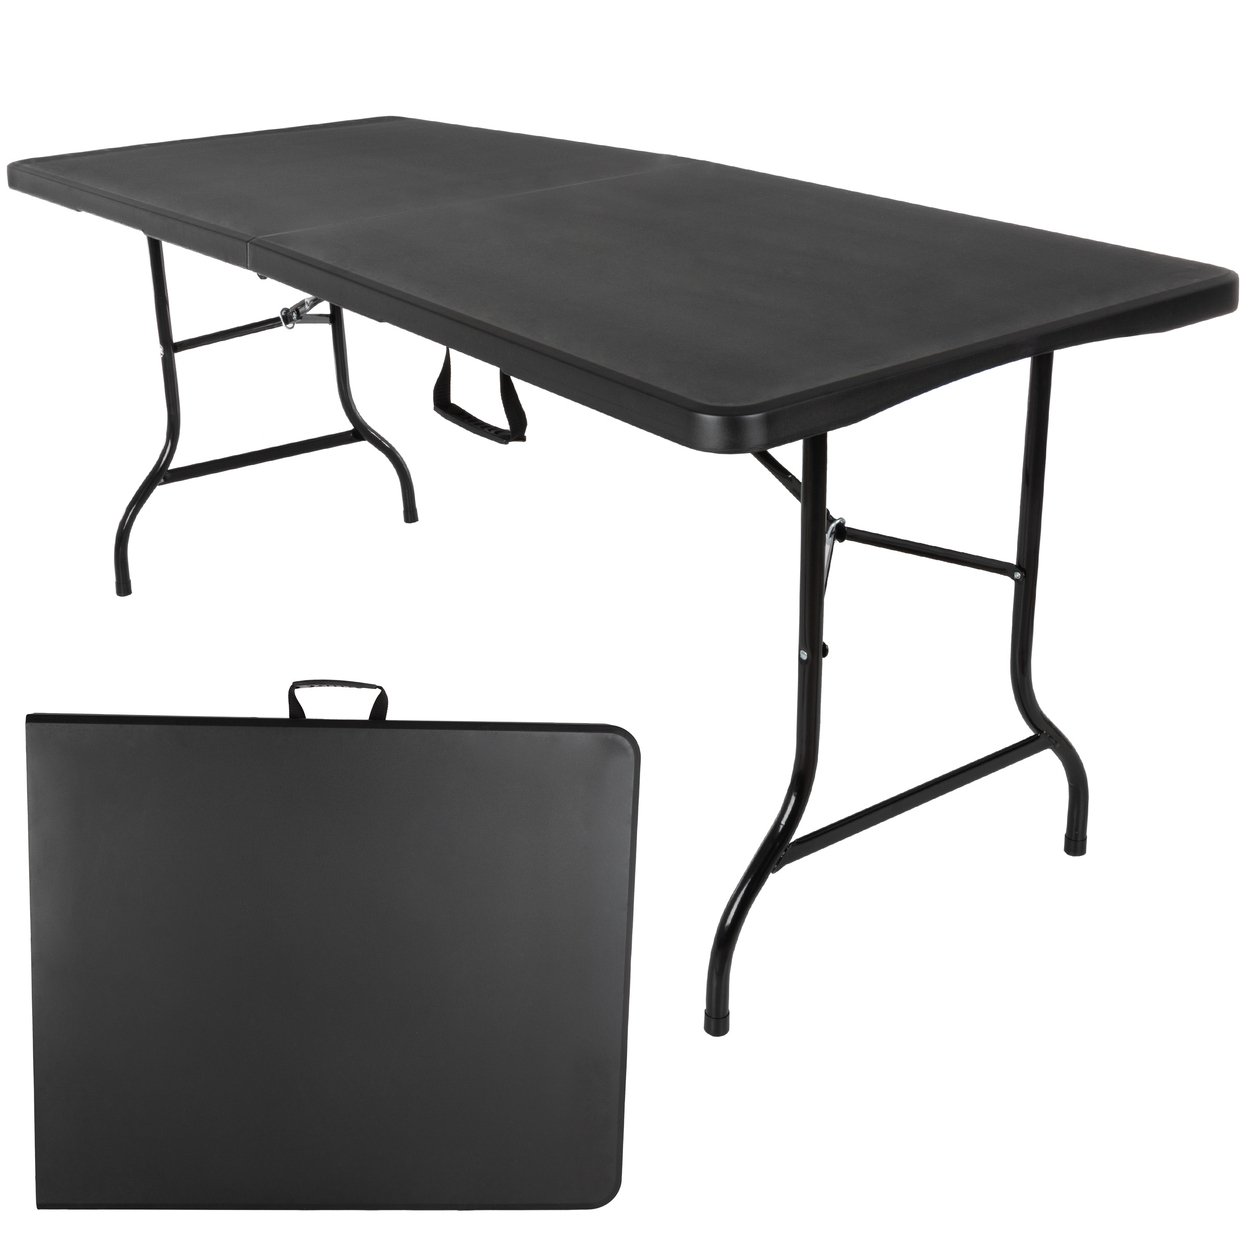 Folding Table Lightweight Portable Folding Desk 6ft Long Table For Camping